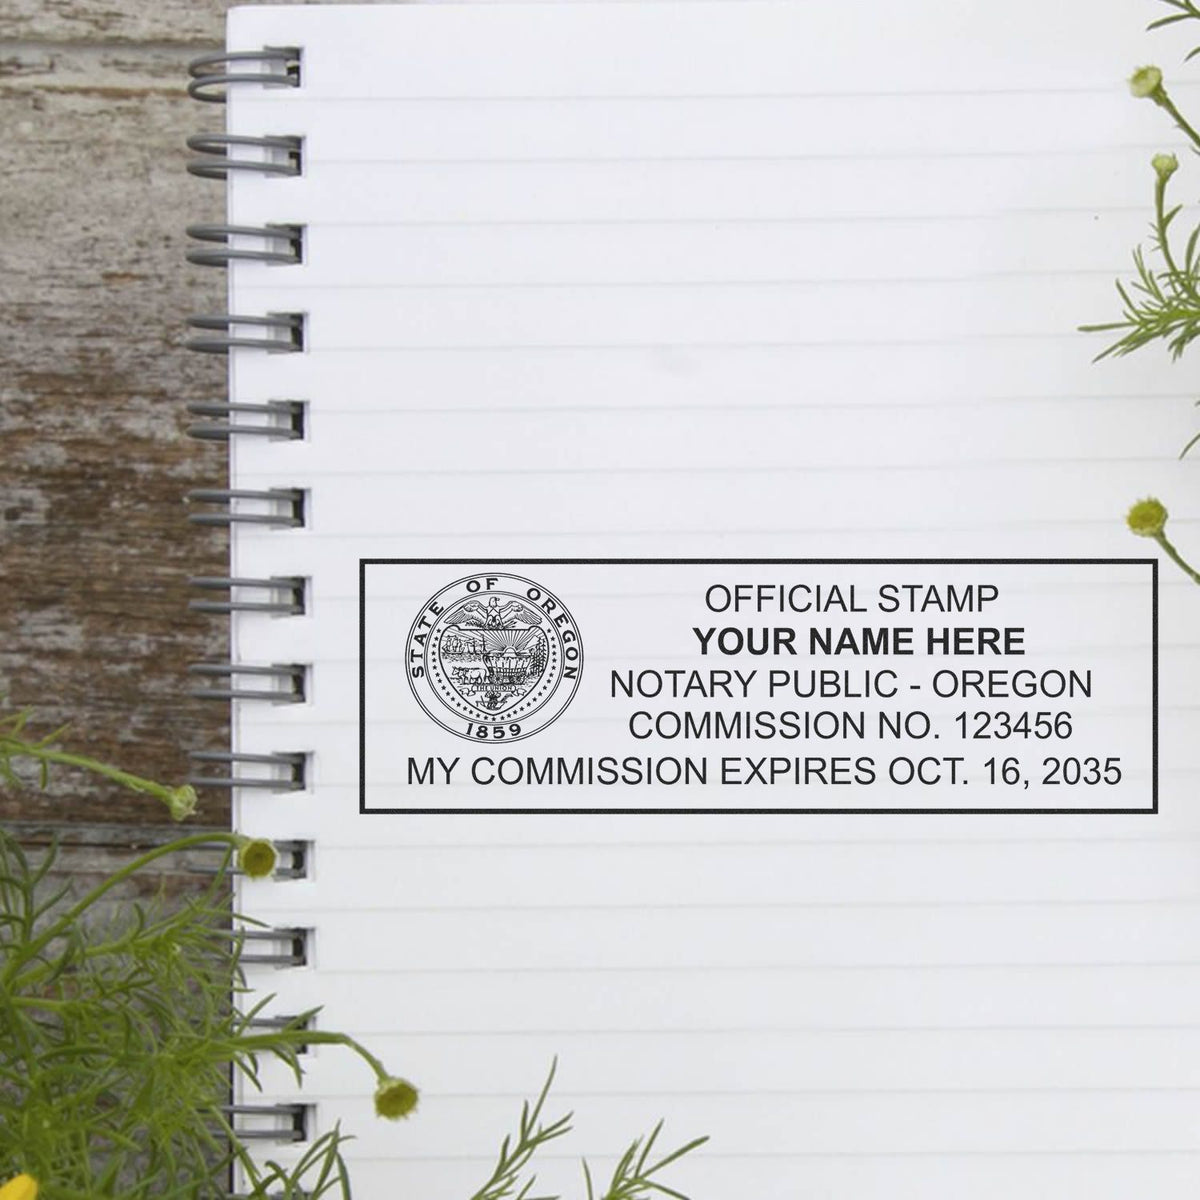 This paper is stamped with a sample imprint of the Super Slim Oregon Notary Public Stamp, signifying its quality and reliability.